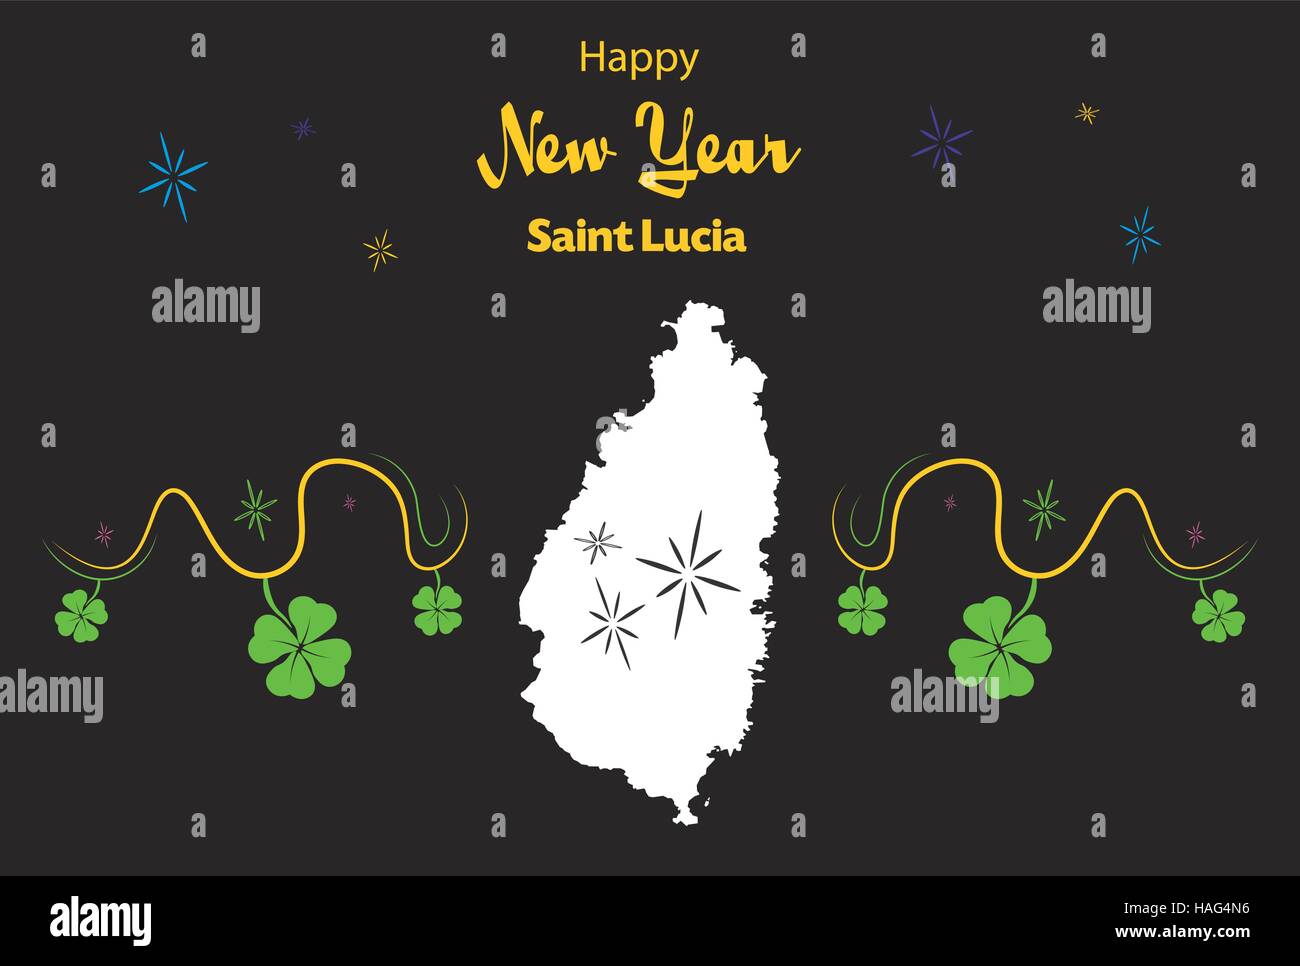 Happy New Year illustration theme with map of Saint Lucia Stock Vector